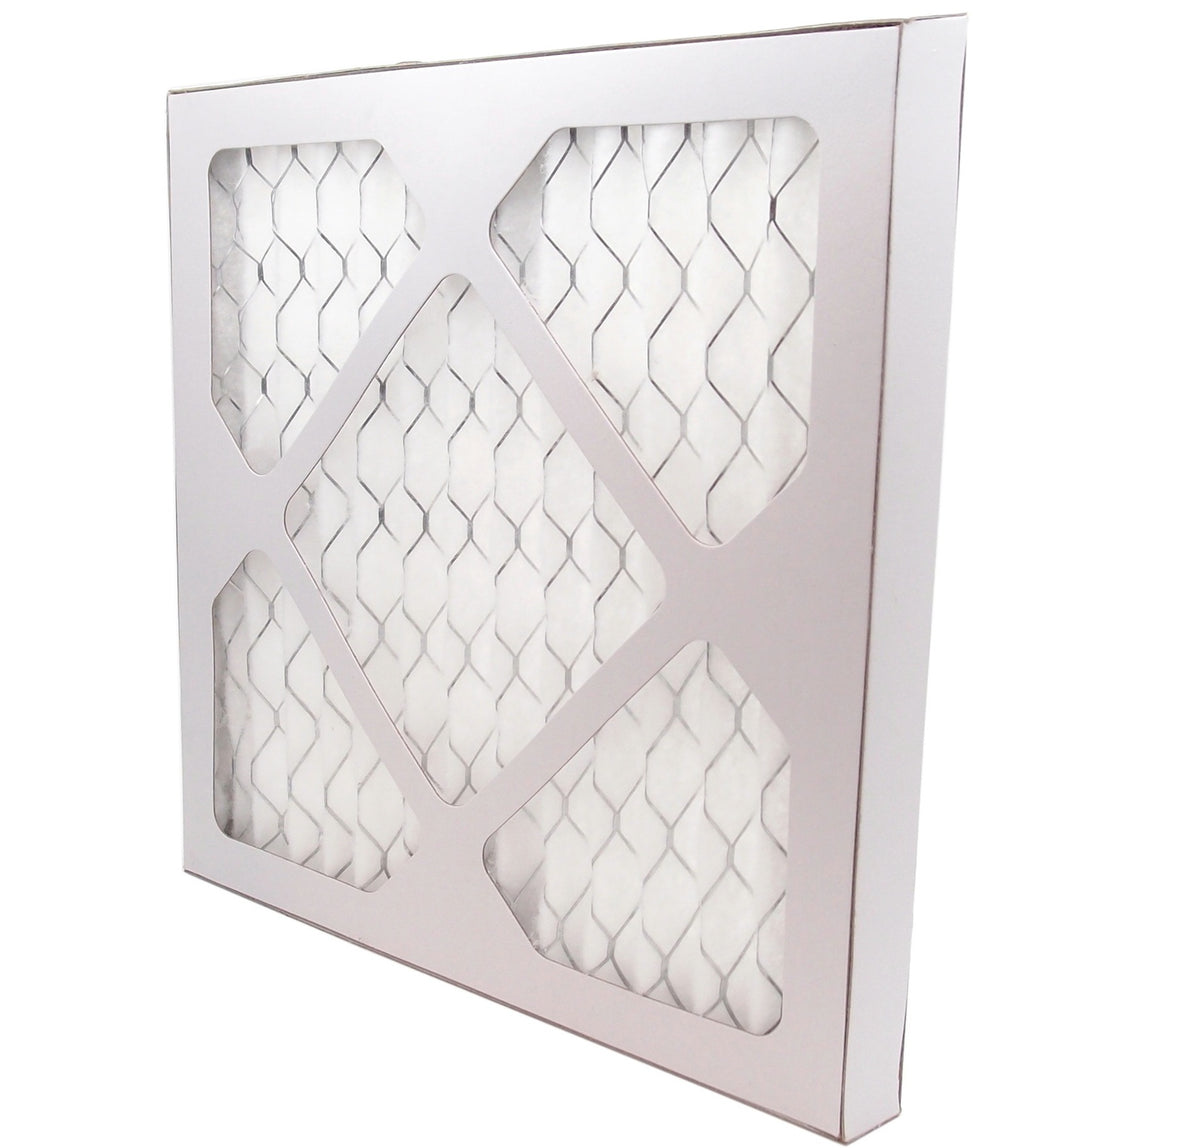 22&quot; x 22&quot; Pleated MERV 8 Filter for HVAC Return Filter Grille